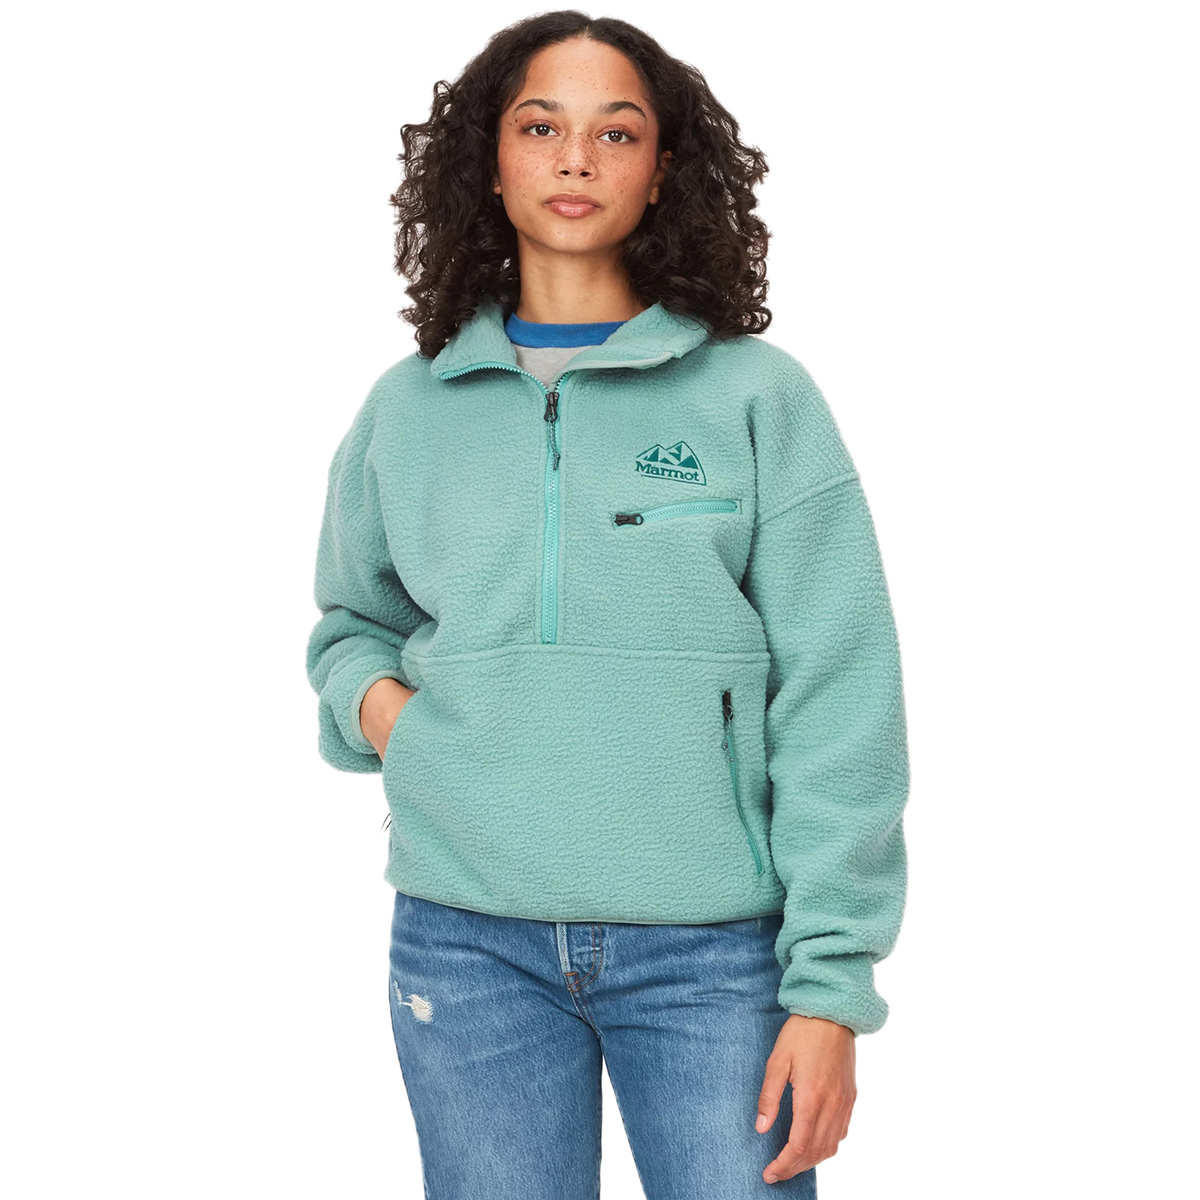 Marmot 94 E.C.O. Recycled Fleece - Women's, Victory Red — Womens Clothing  Size: Large, Length, Alpha: Regular, Sleeve Length: Regular, Apparel Fit:  Oversize — M14197-21749-L - 1 out of 15 models